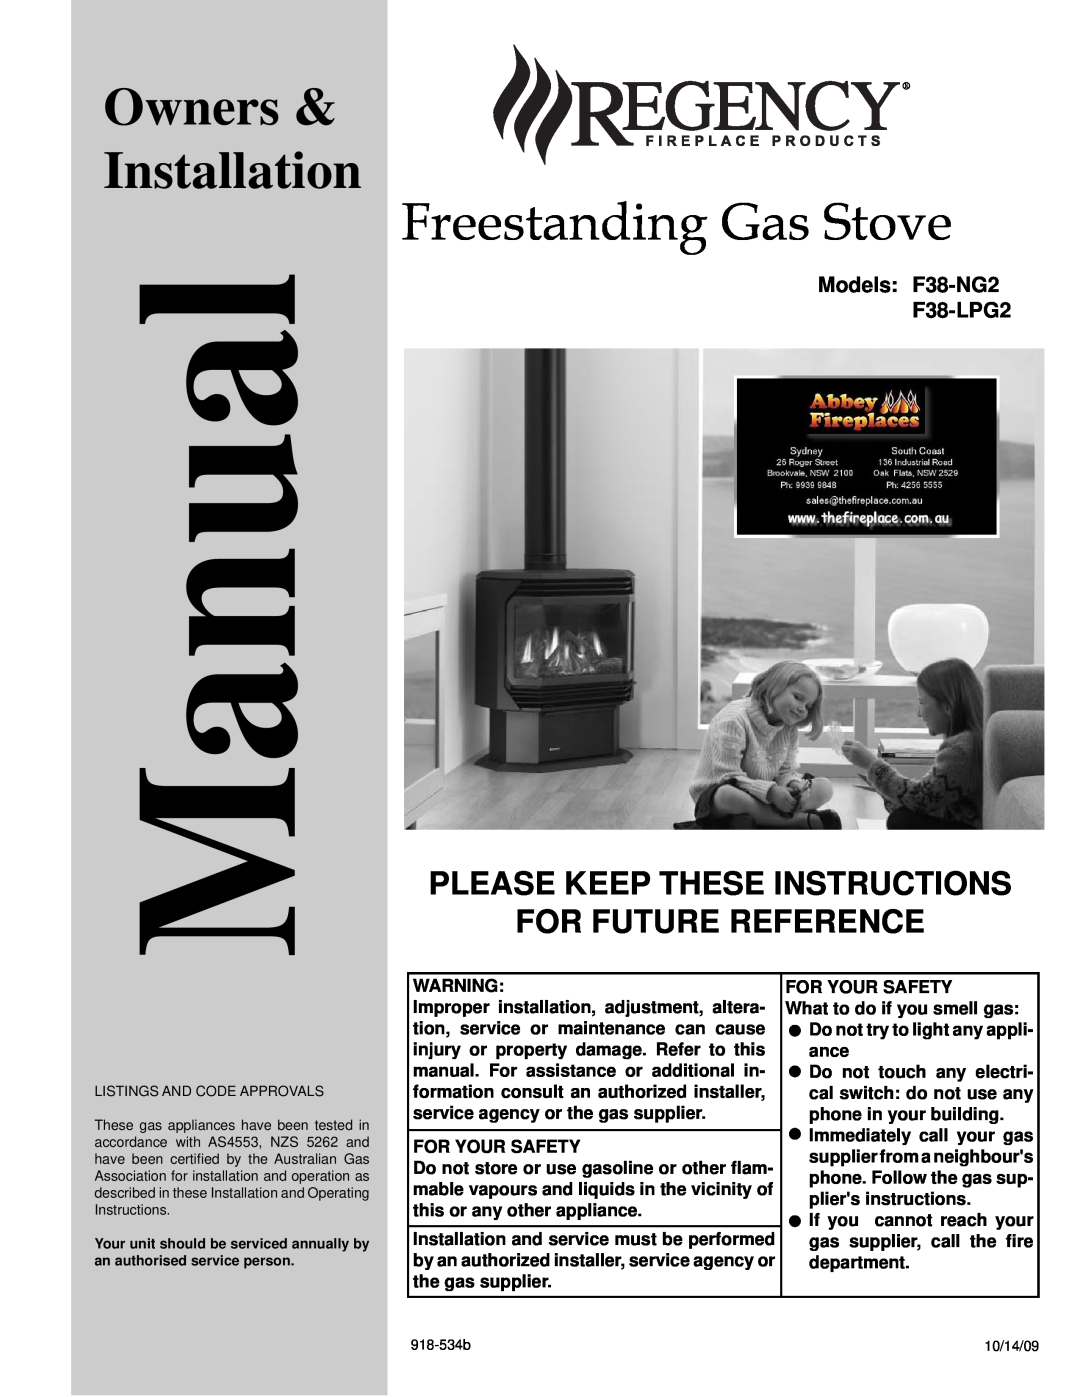 Regency installation manual Please Keep These Instructions, For Future Reference, Models F38-NG2 F38-LPG2, Manual 